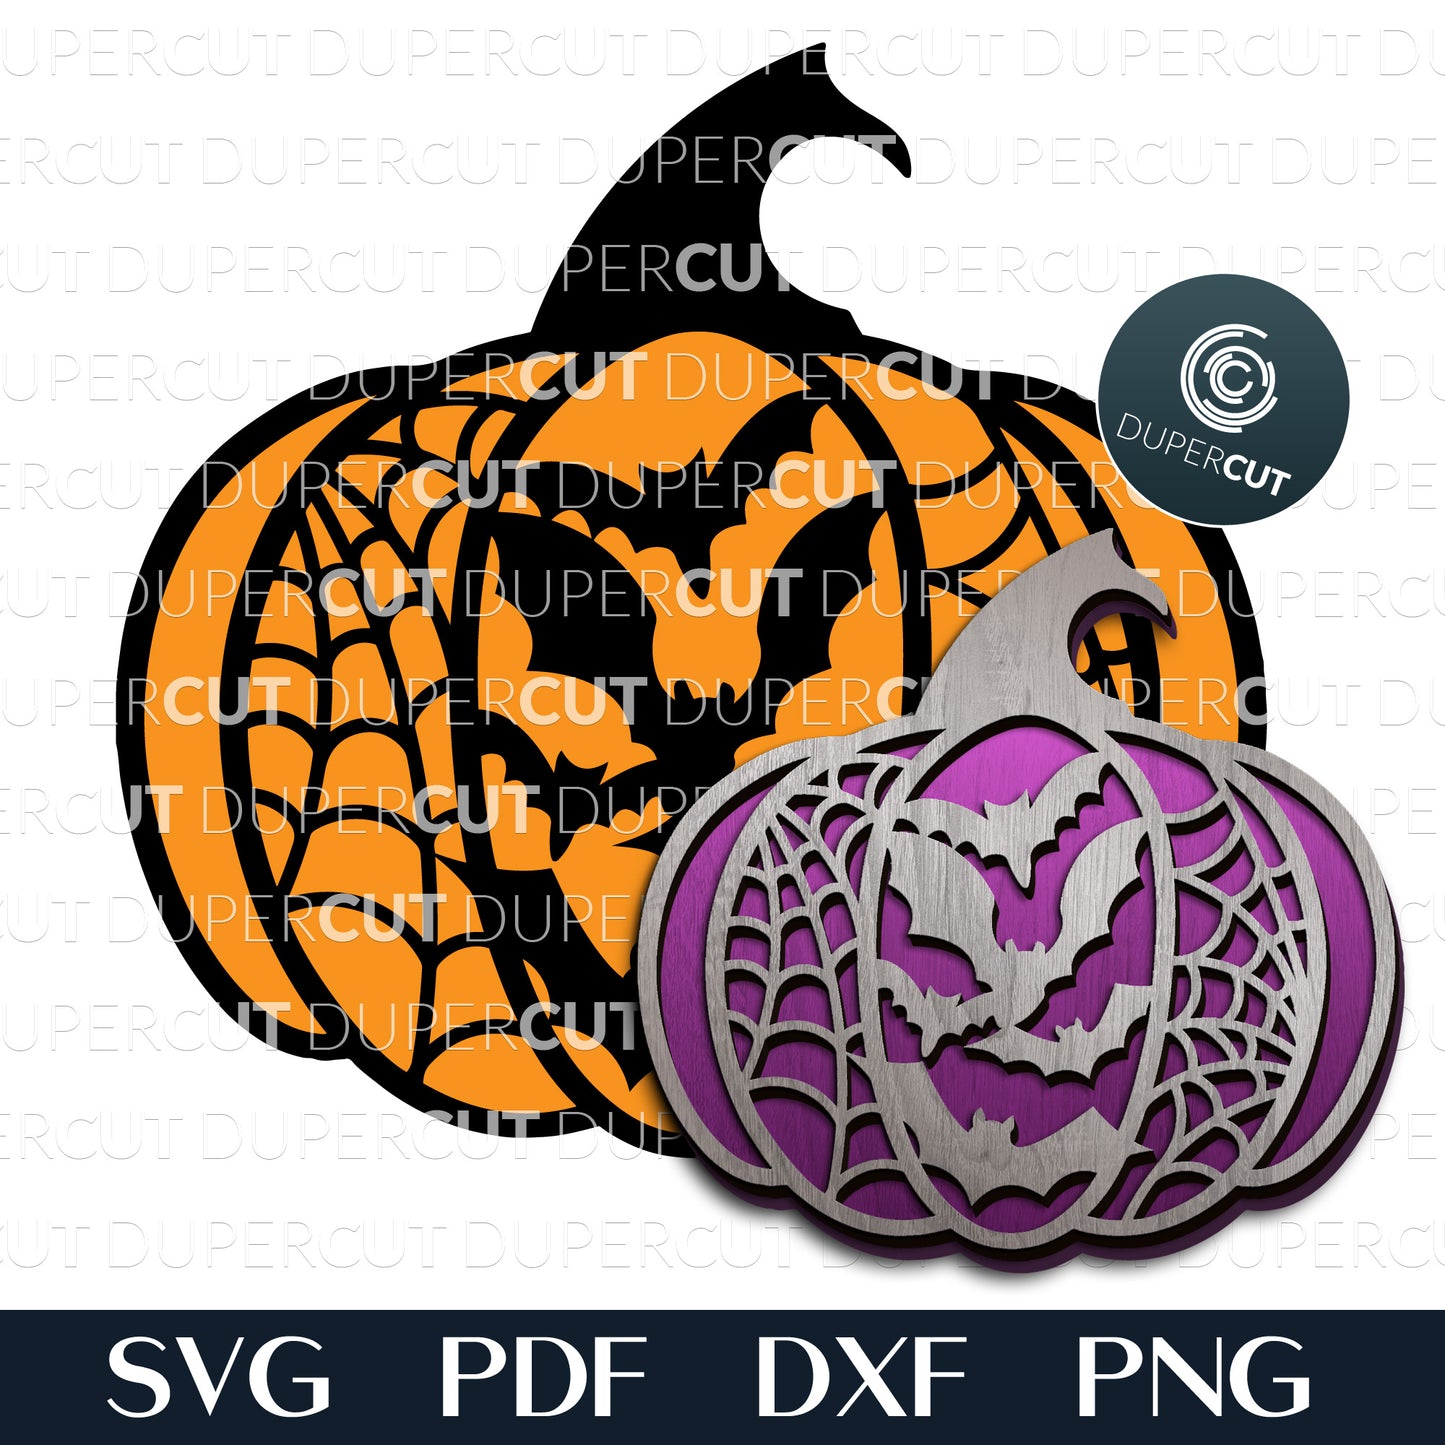 Halloween pumpkin with bats and spider web - SVG PNG DXF layered cutting files for Glowforge, Cricut, Silhouette, laser CNC plasma machines